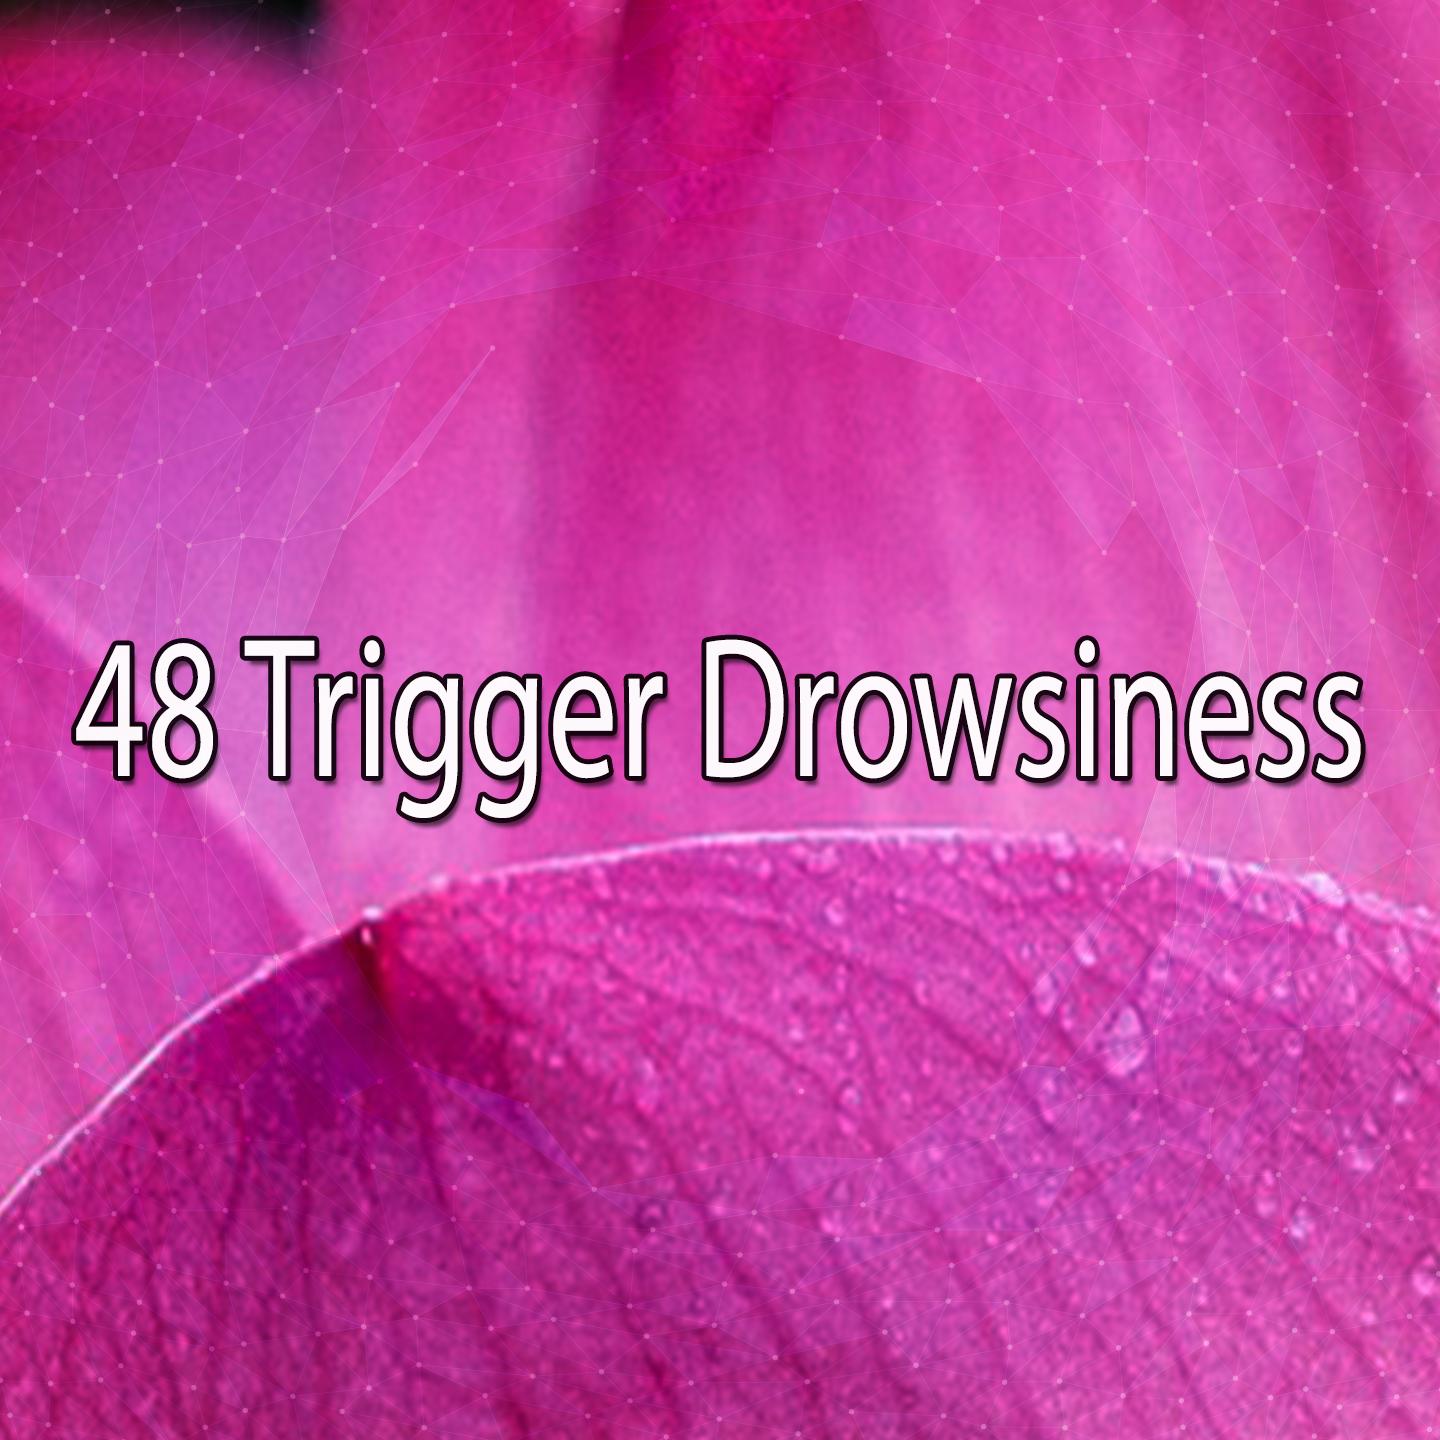 48 Trigger Drowsiness